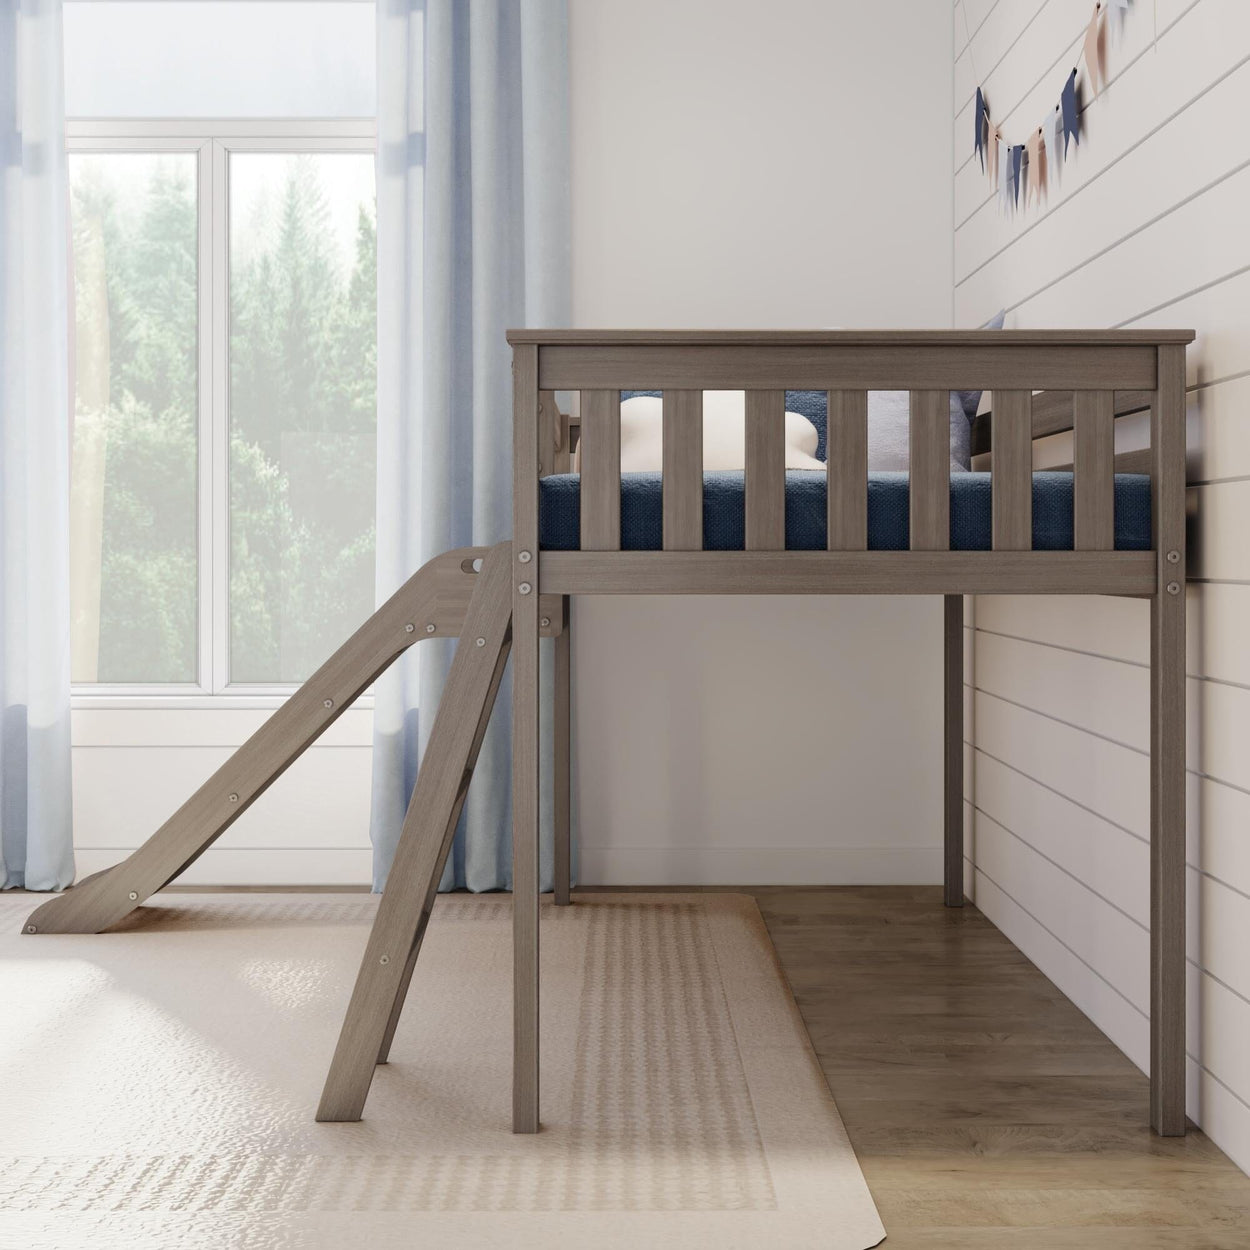 180413-151 : Loft Beds Max & Lily Twin Size Low Loft Bed with Slide and Ladder, Classic Solid Wood Kids Bedroom Furniture, 400 lbs Weight Capacity, 14" Safety Guardrail, Anti-Slip Steps, Clay